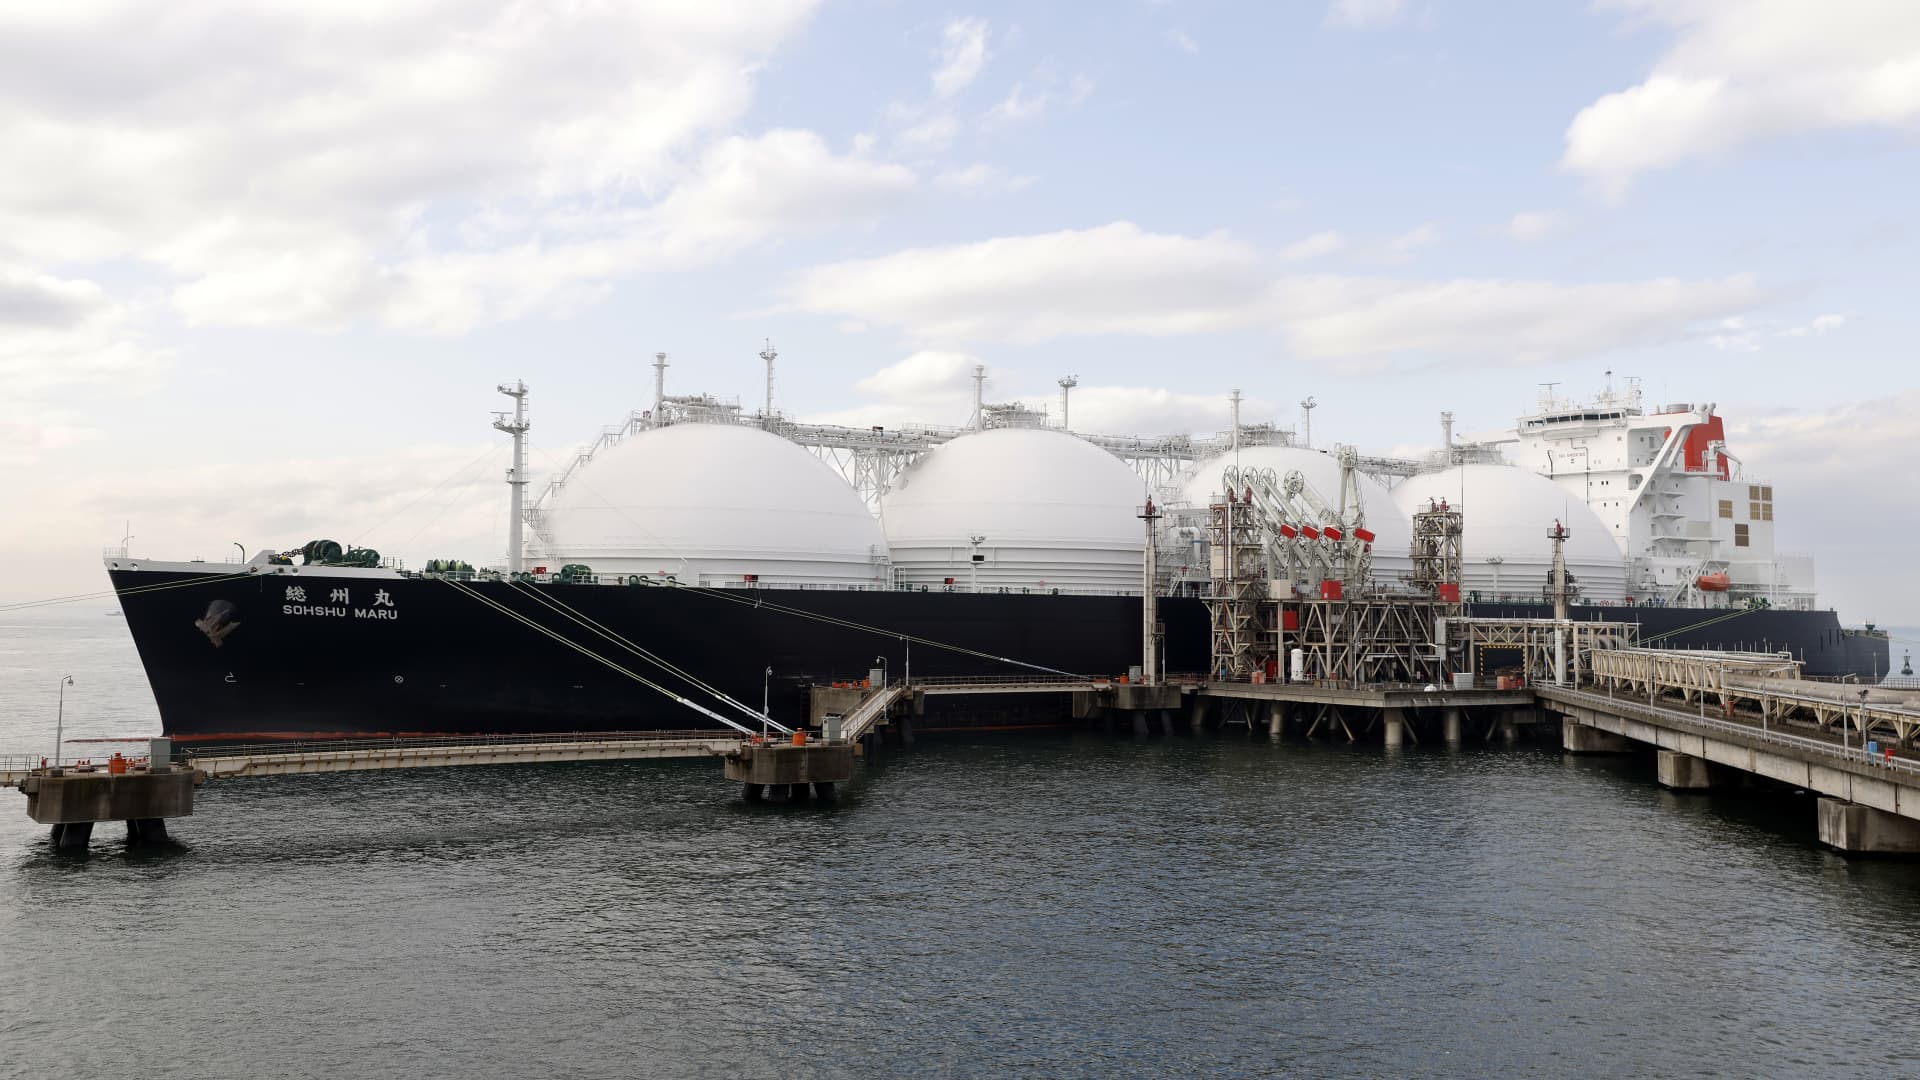 The liquefied natural gas tanker Sohshu Maru berthed in Japan on Dec. 17, 2021. Japan's industry minister said an exit of Japan from the Sakhalin energy projects in Russia could reduce the impact of Western sanctions and benefit Russia, according to Reuters.